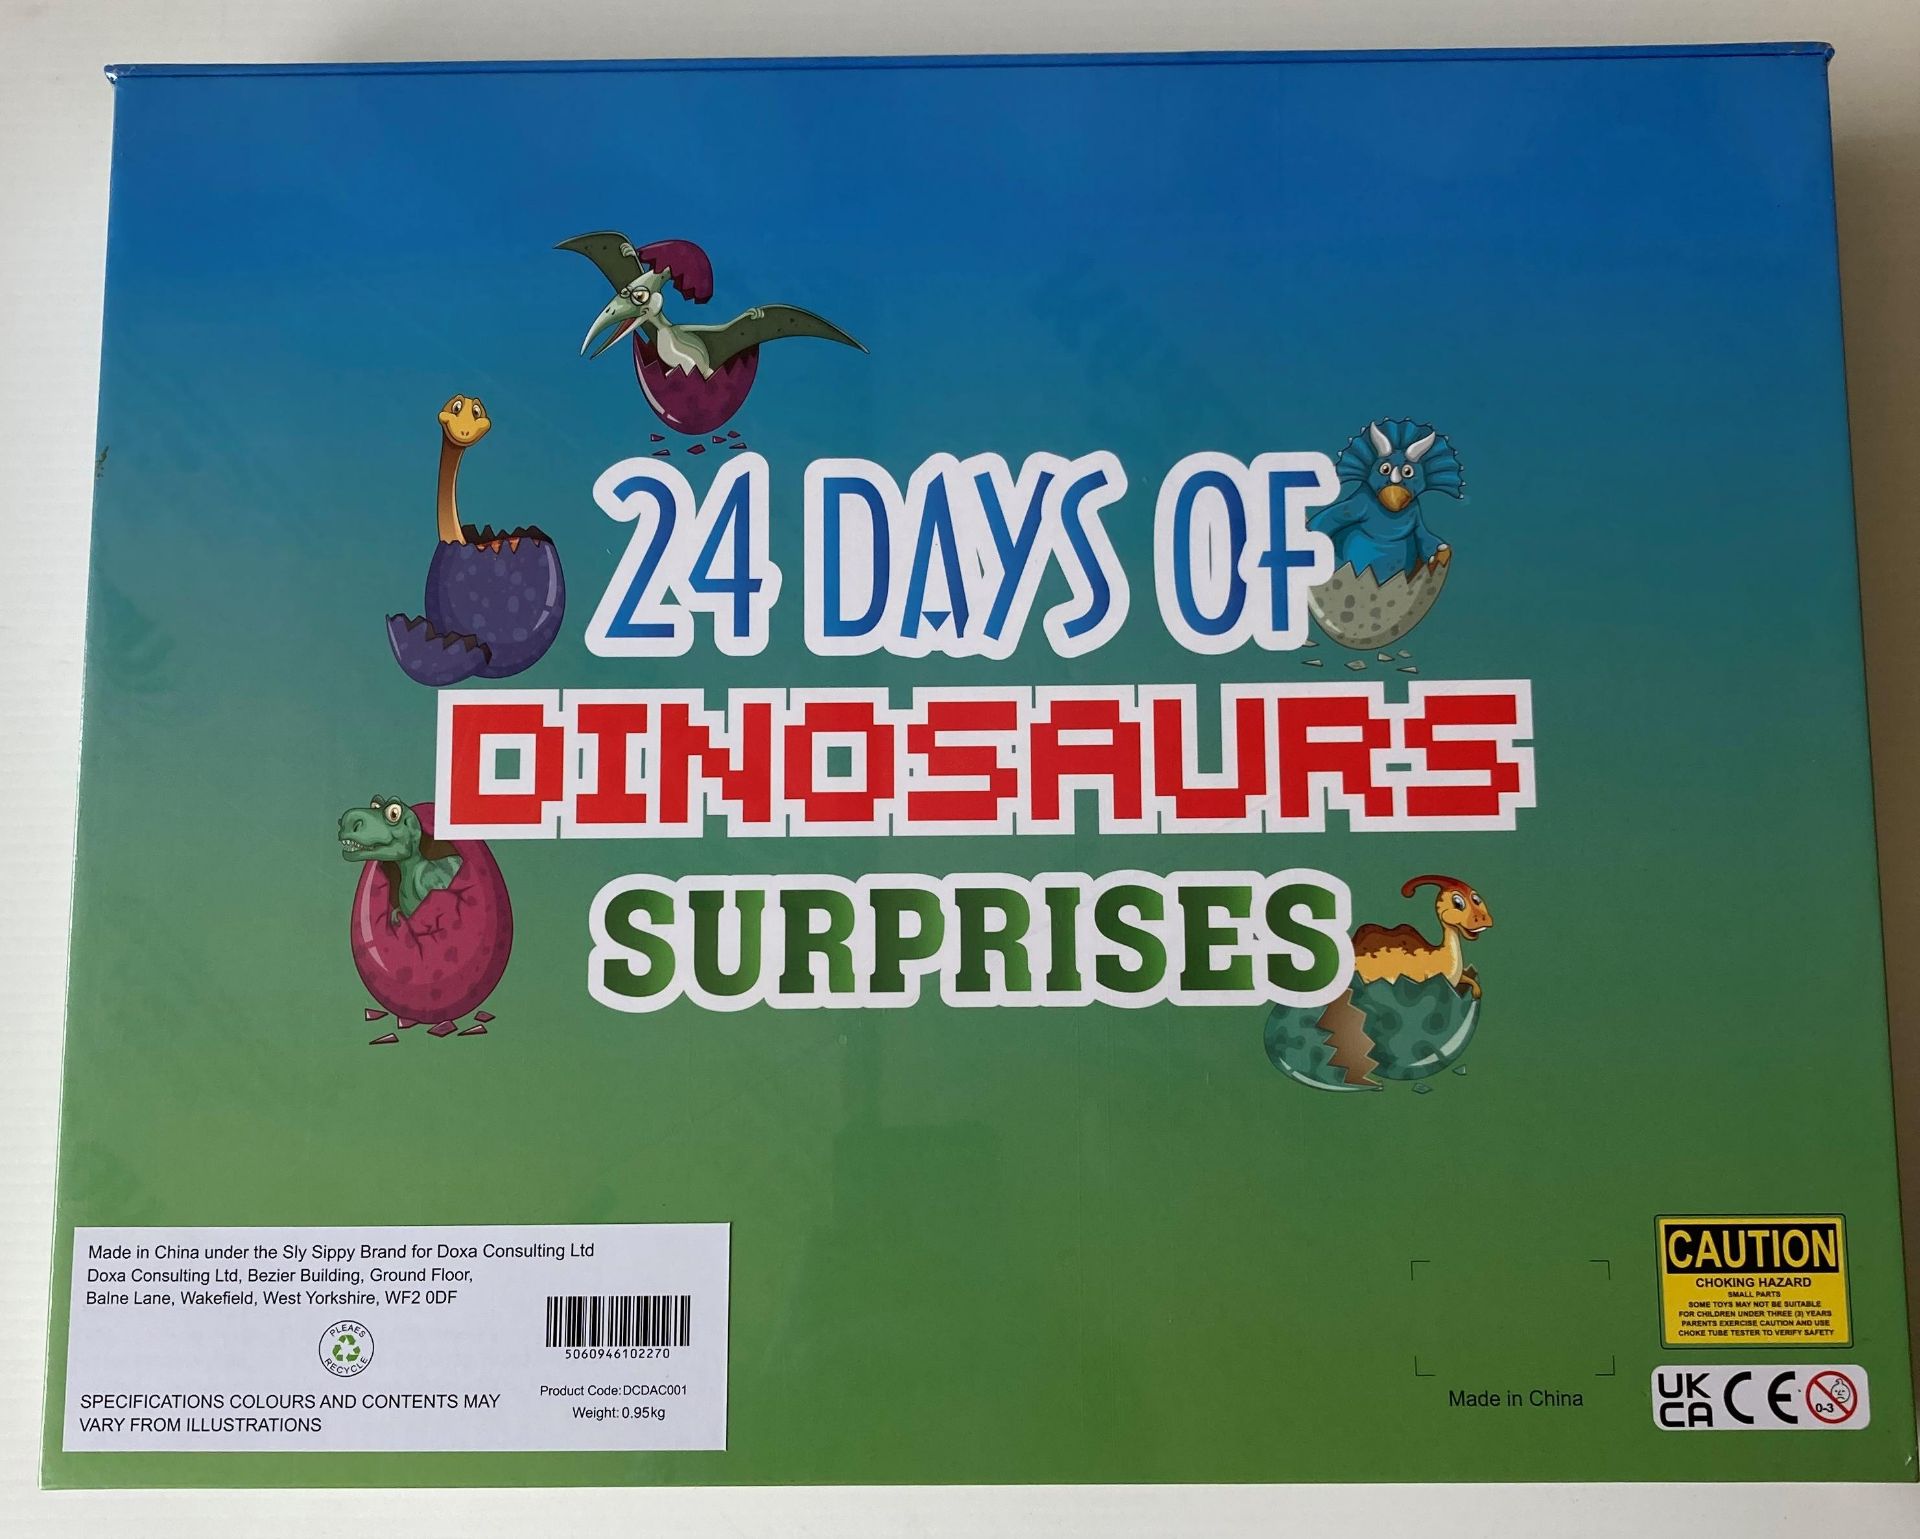 100 x 24 Days of Dinosaur Surprises Avent Calendars (5 x outer box) (saleroom location: container - Image 2 of 2